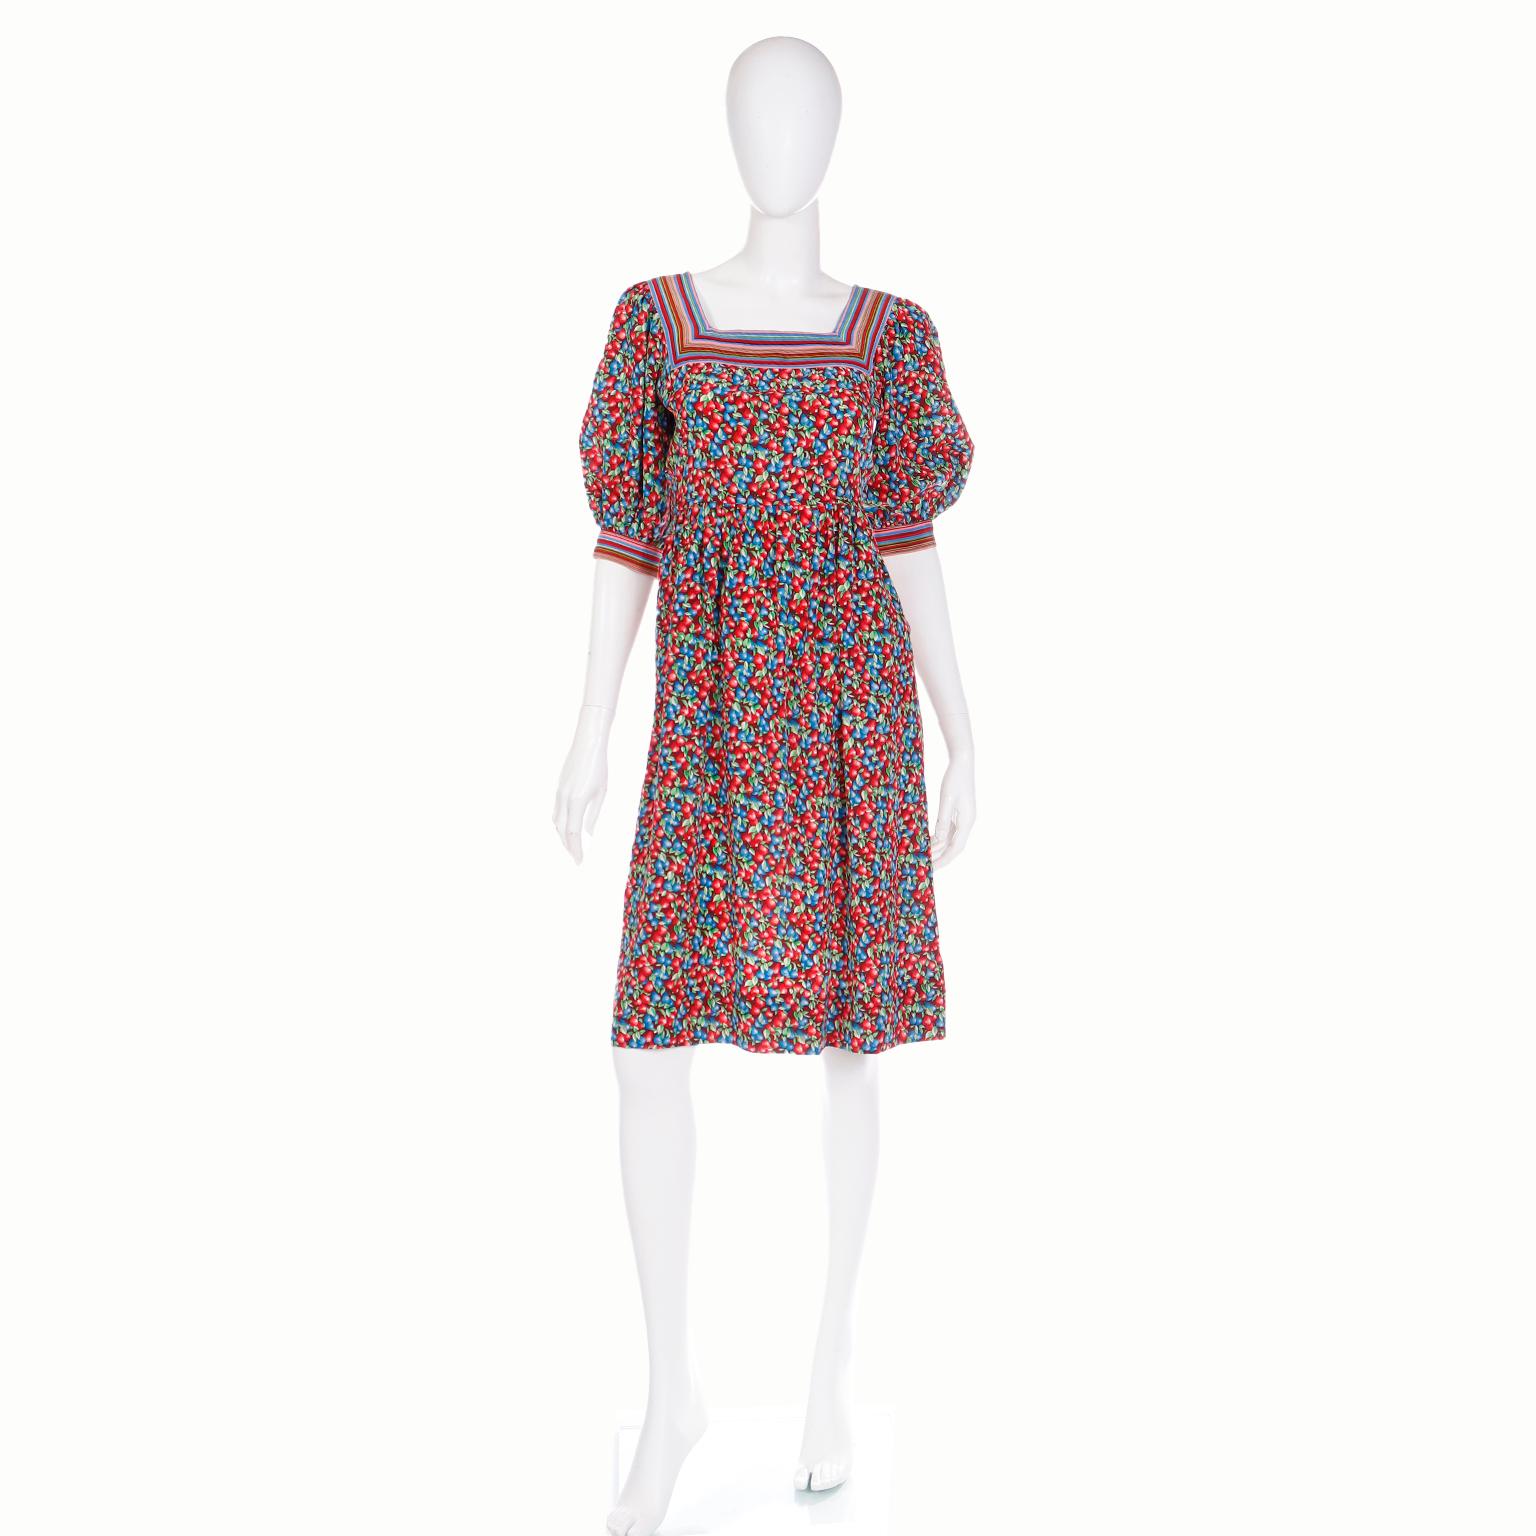 Vintage Emanuel Ungaro dresses are know for their beautiful prints and luxe fabrics. This vintage late 1970's or early 1980's silk dress is in a red and blue berry fruit print in shades of blue, red, green and pink with colorful  stripes at the